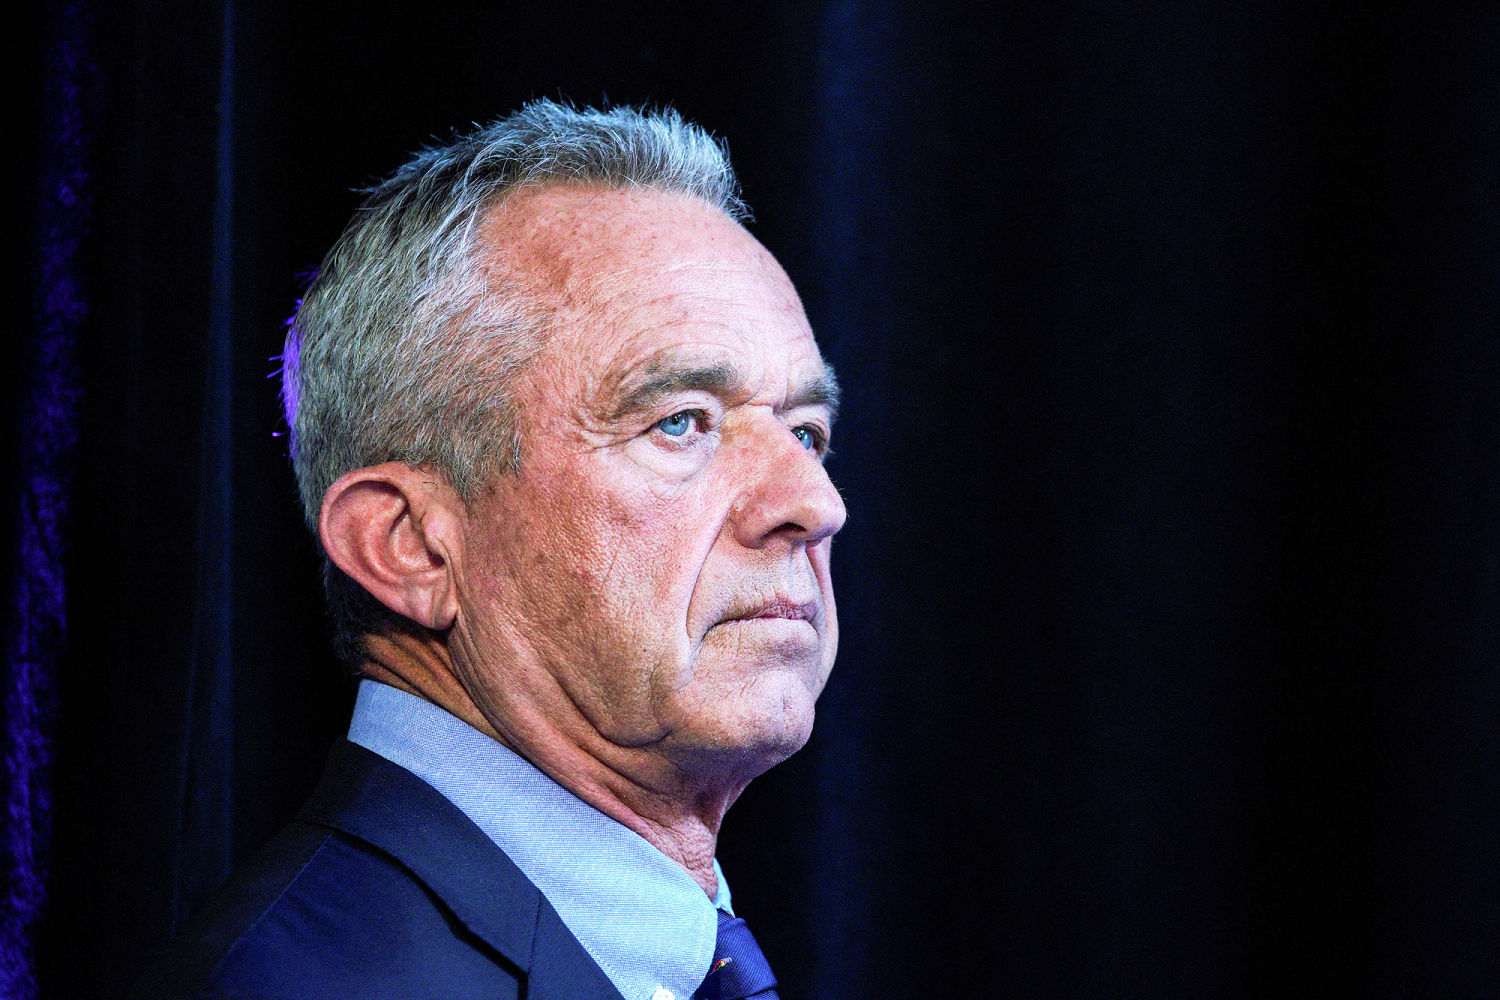 RFK Jr.’s response to allegations of sexual assault: ‘I am who I am’